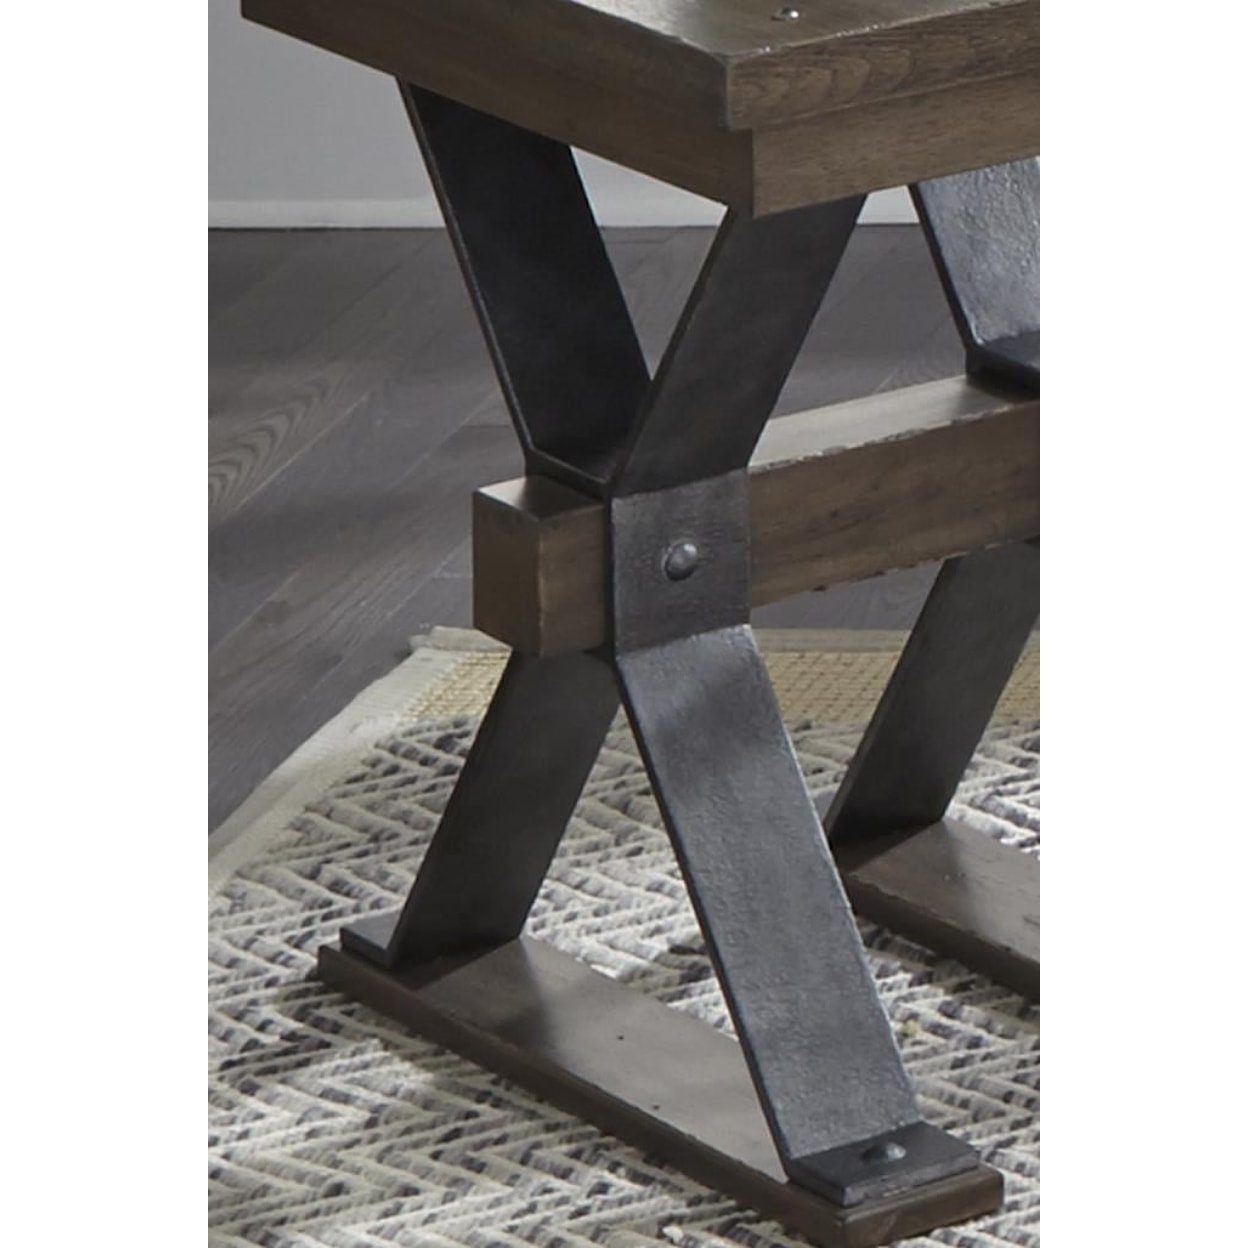 Liberty Furniture Sonoma Road End Table